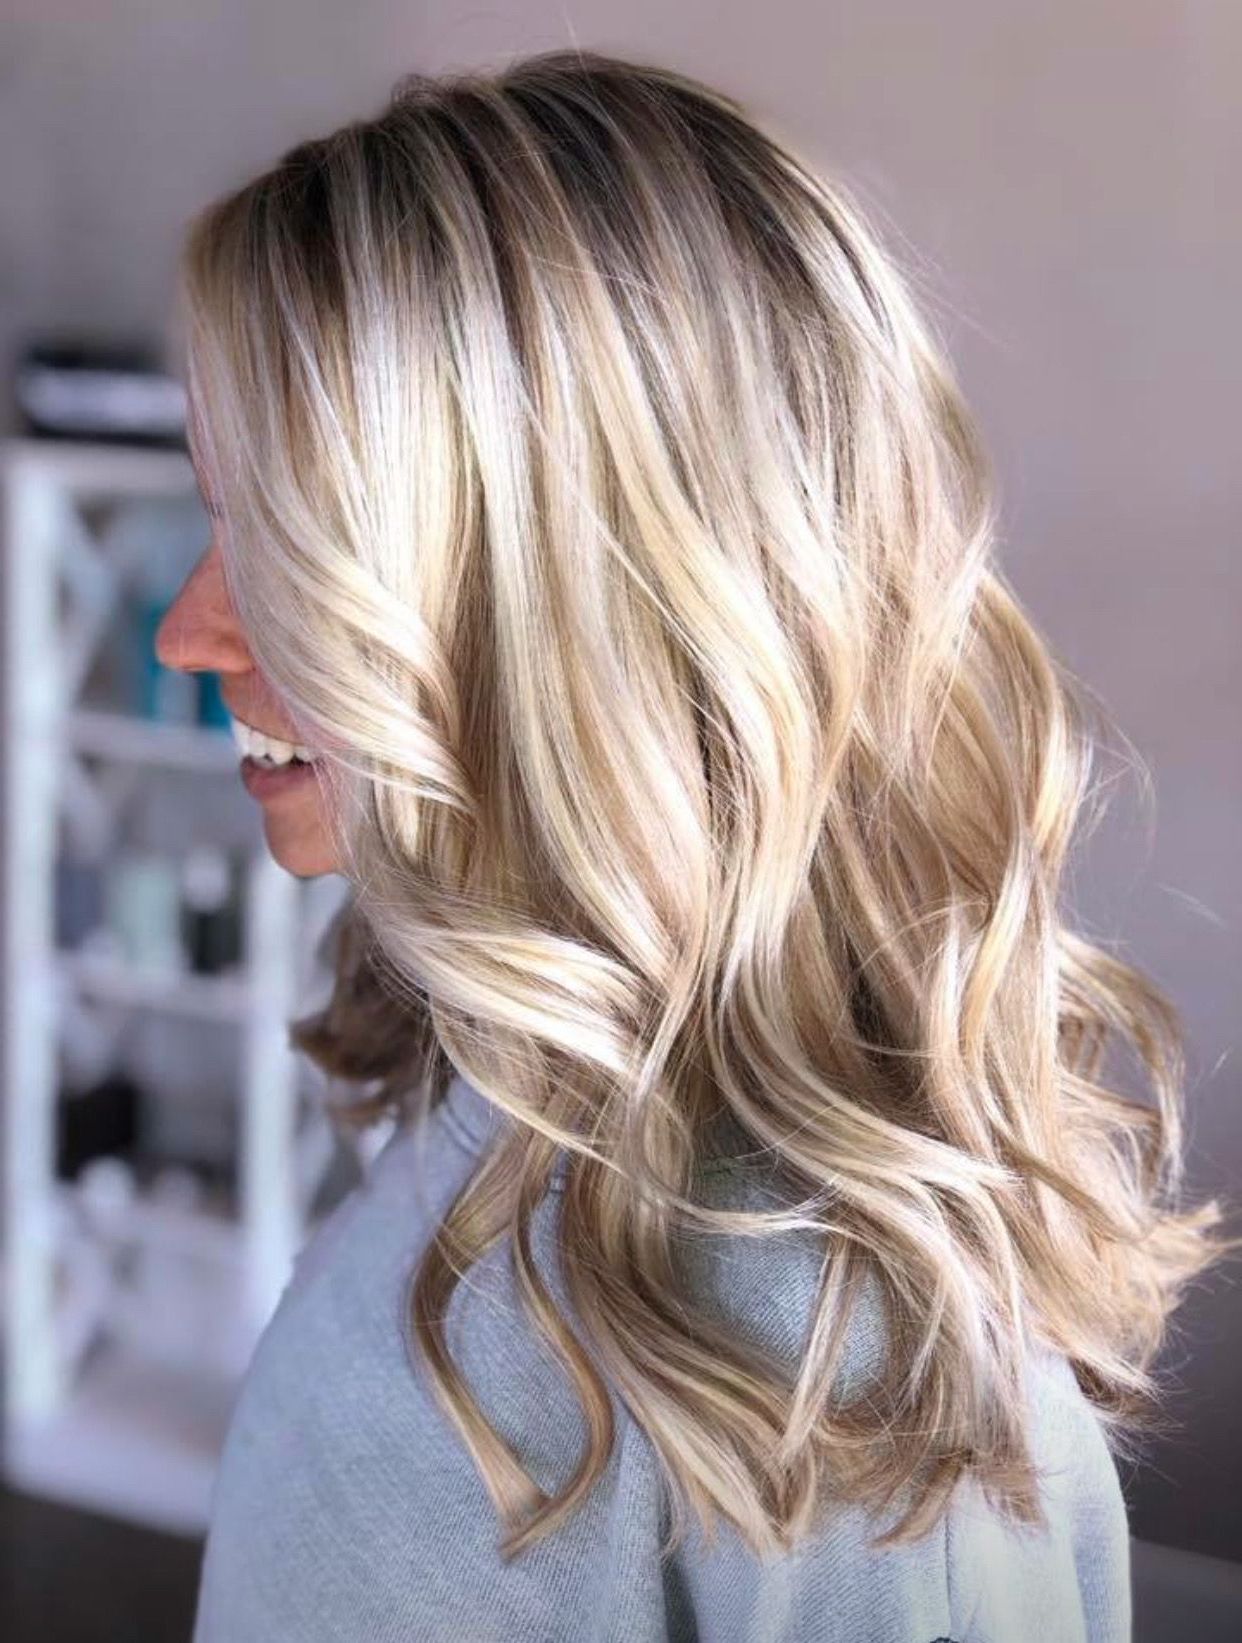 Icy Blonde Highlights. Blonde Hair. Beach Waves. Highlights And Lowlights (View 1 of 25)